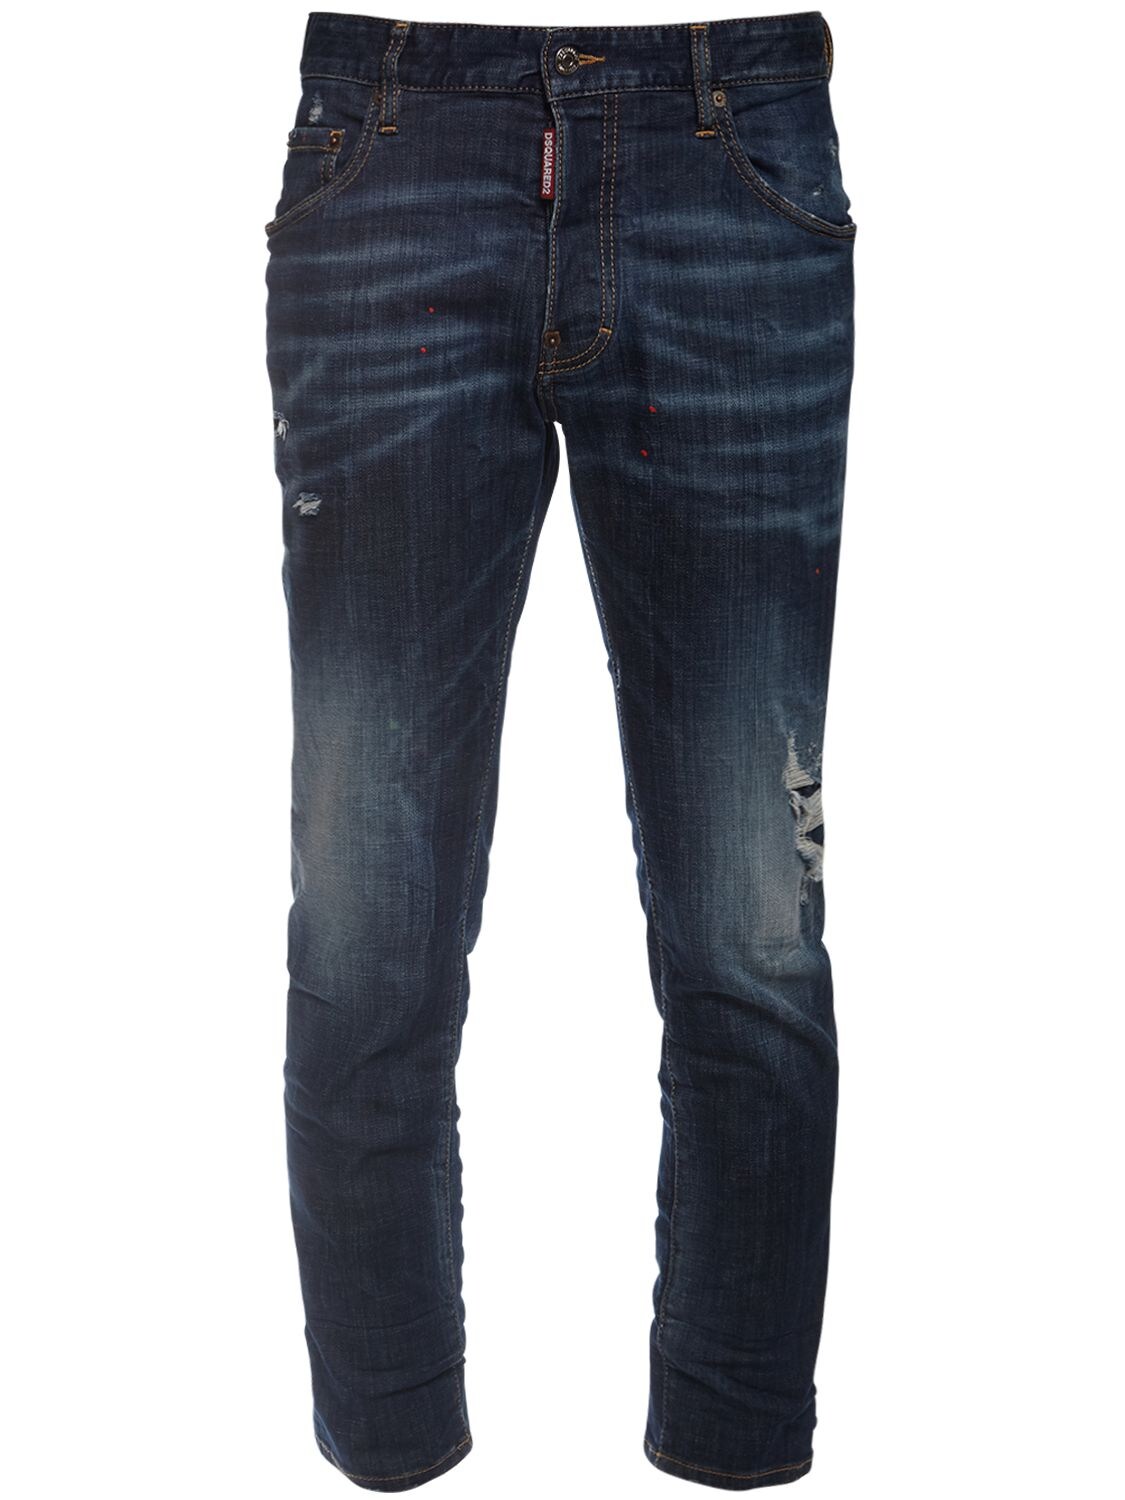 DSQUARED2 DISTRESSED SKATER COTTON DENIM JEANS,72IS3C021-NDCW0